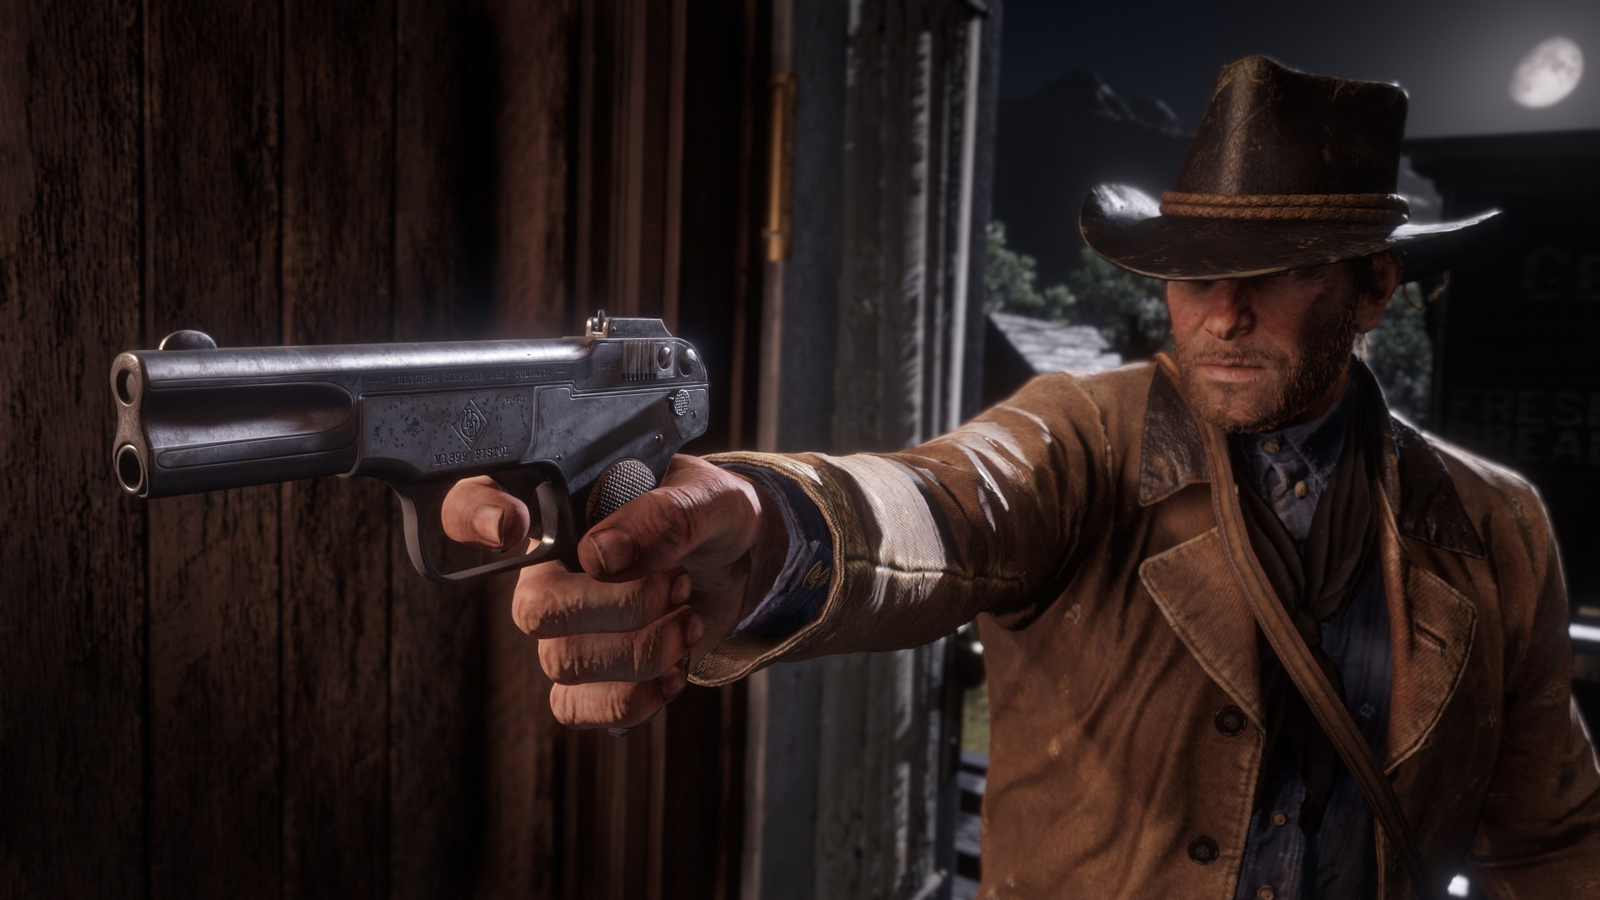 Red Dead Redemption 2 PC - Combat & Free Roam Gameplay - RTX 2080 Ti 